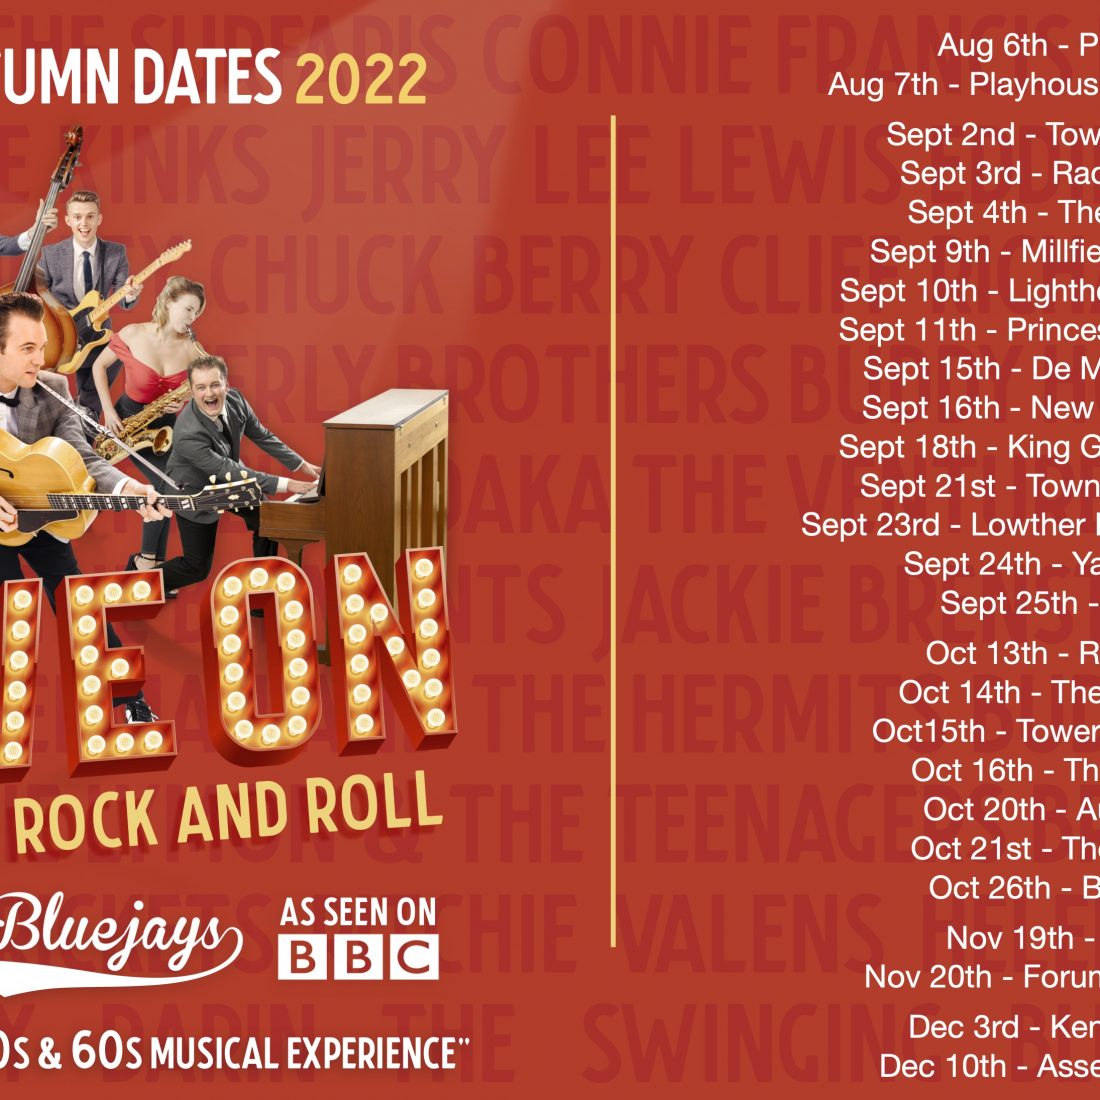 Autumn DATES 2022 UPDATED MAY 2022 Rave On image 1200 x 600